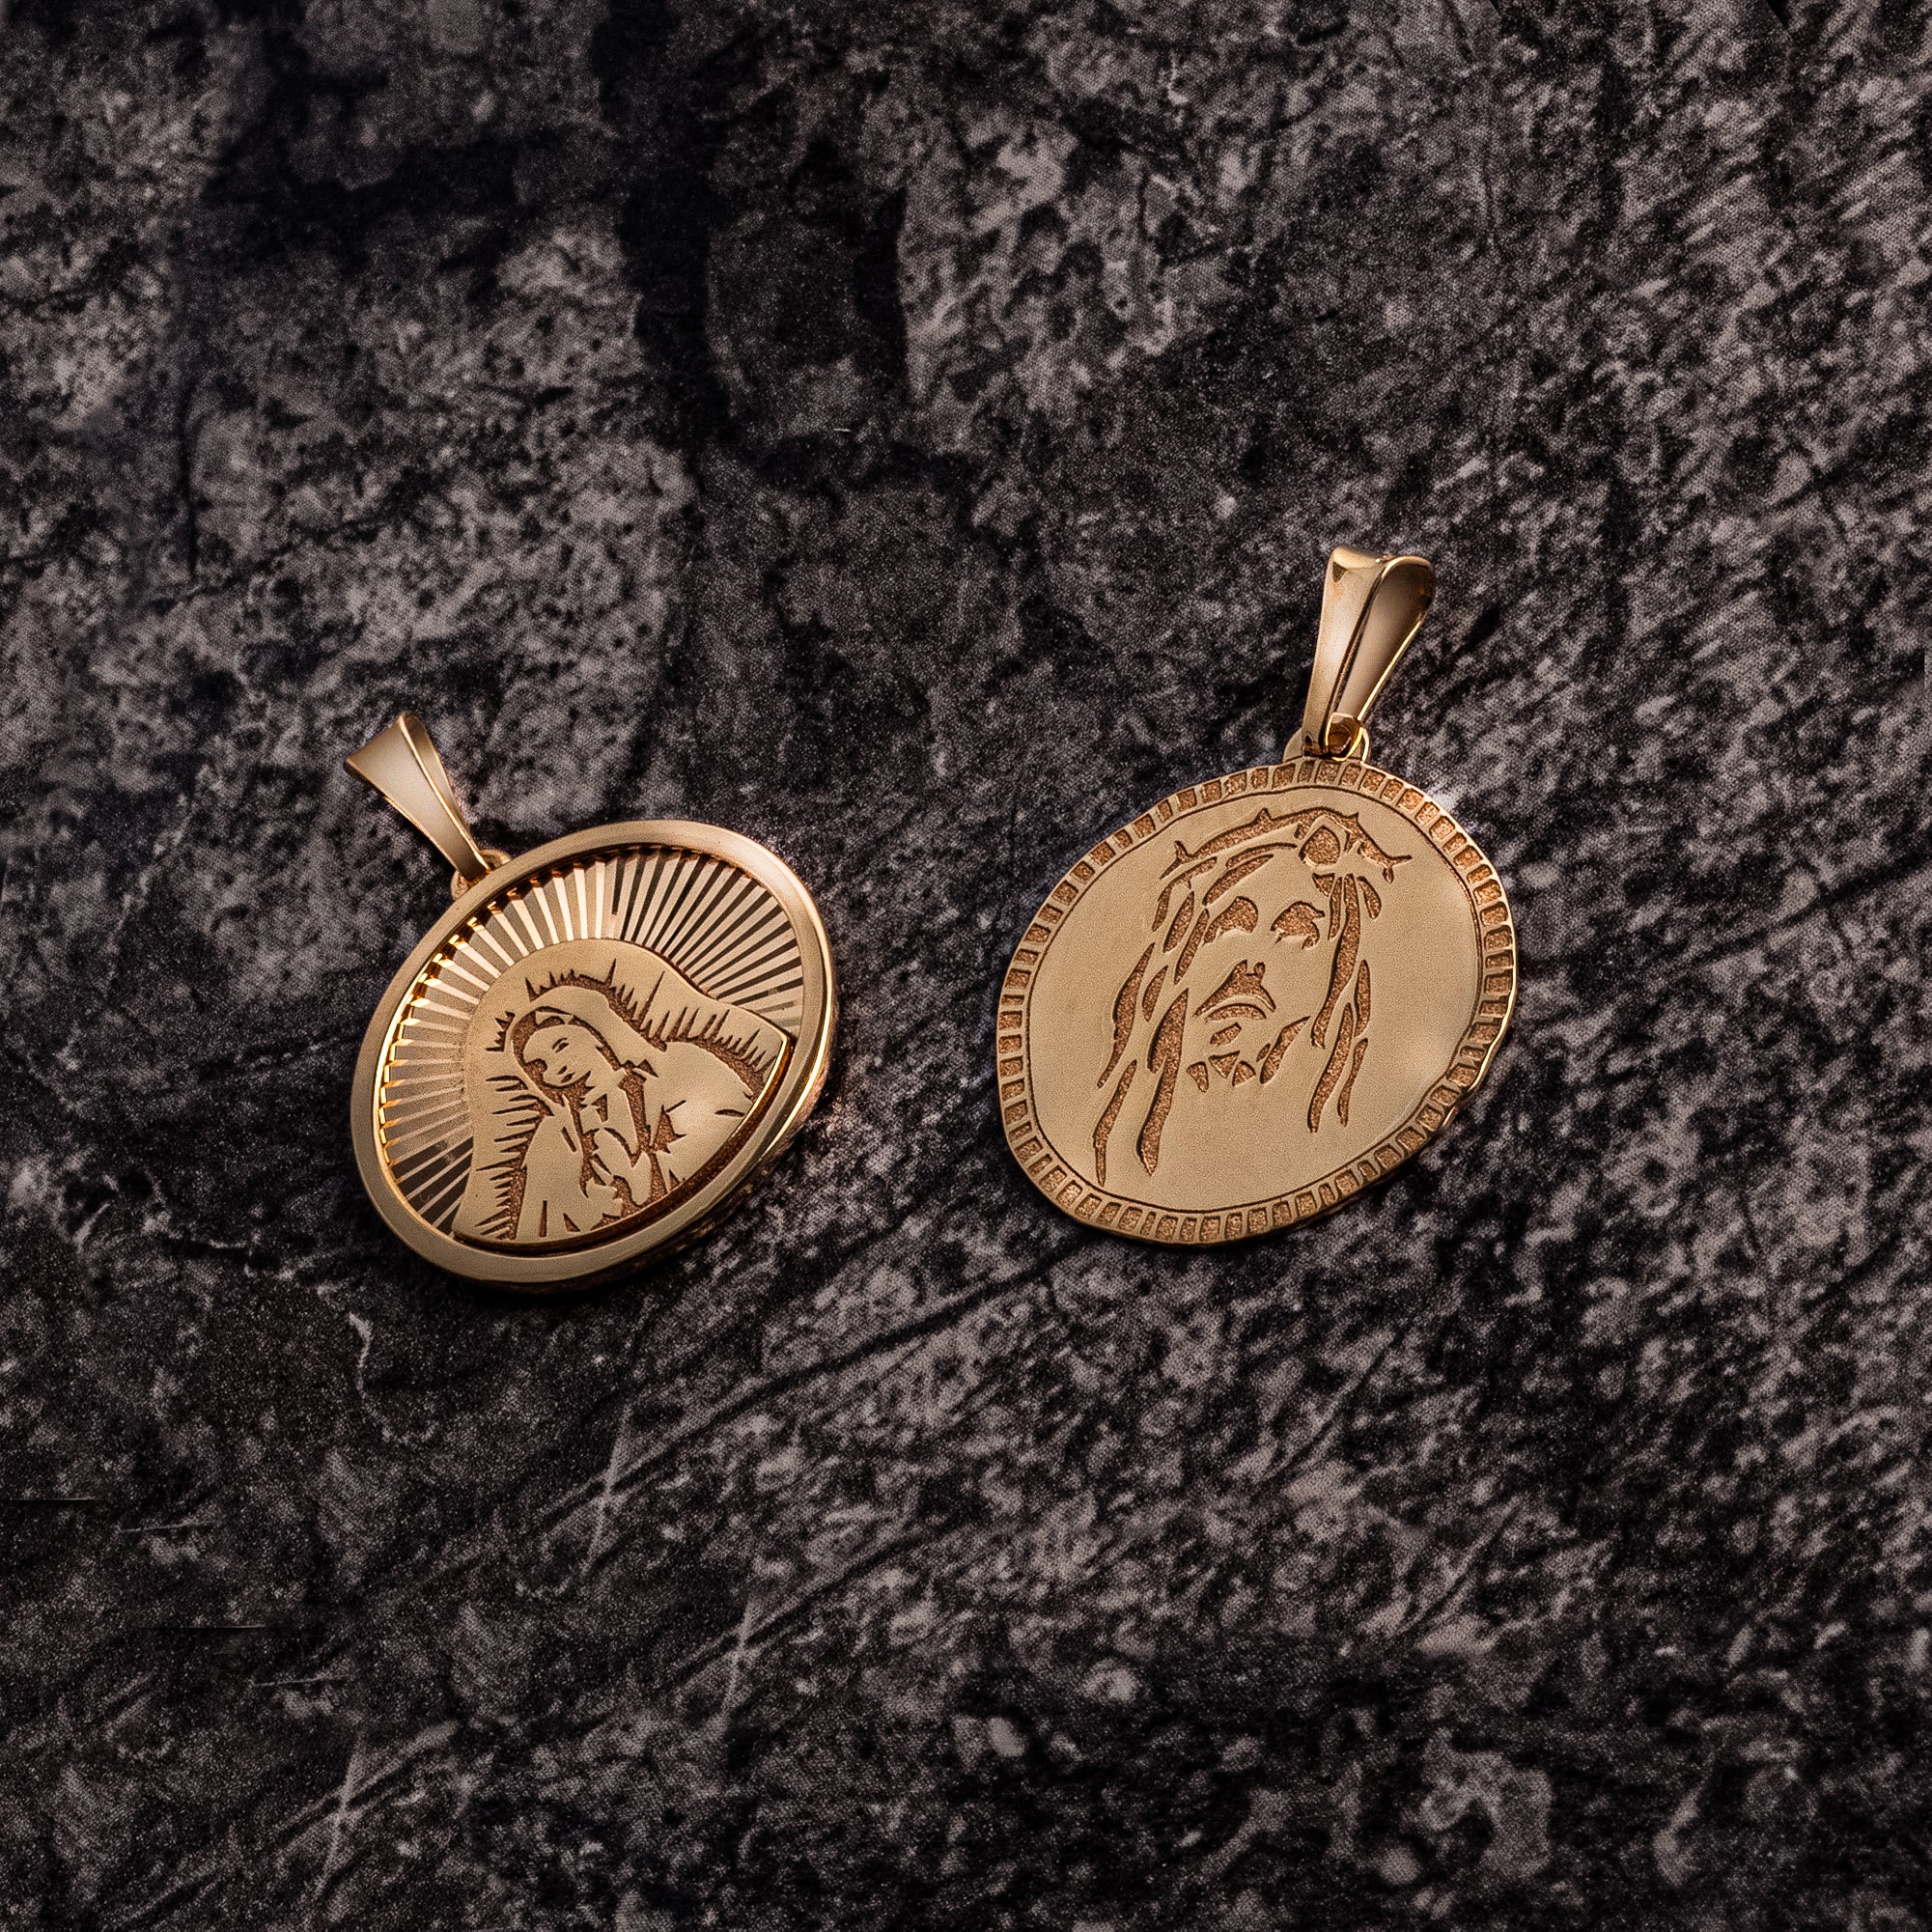 Virgin Mary Miraculous Medallion Jewelry : Pendants and Necklaces